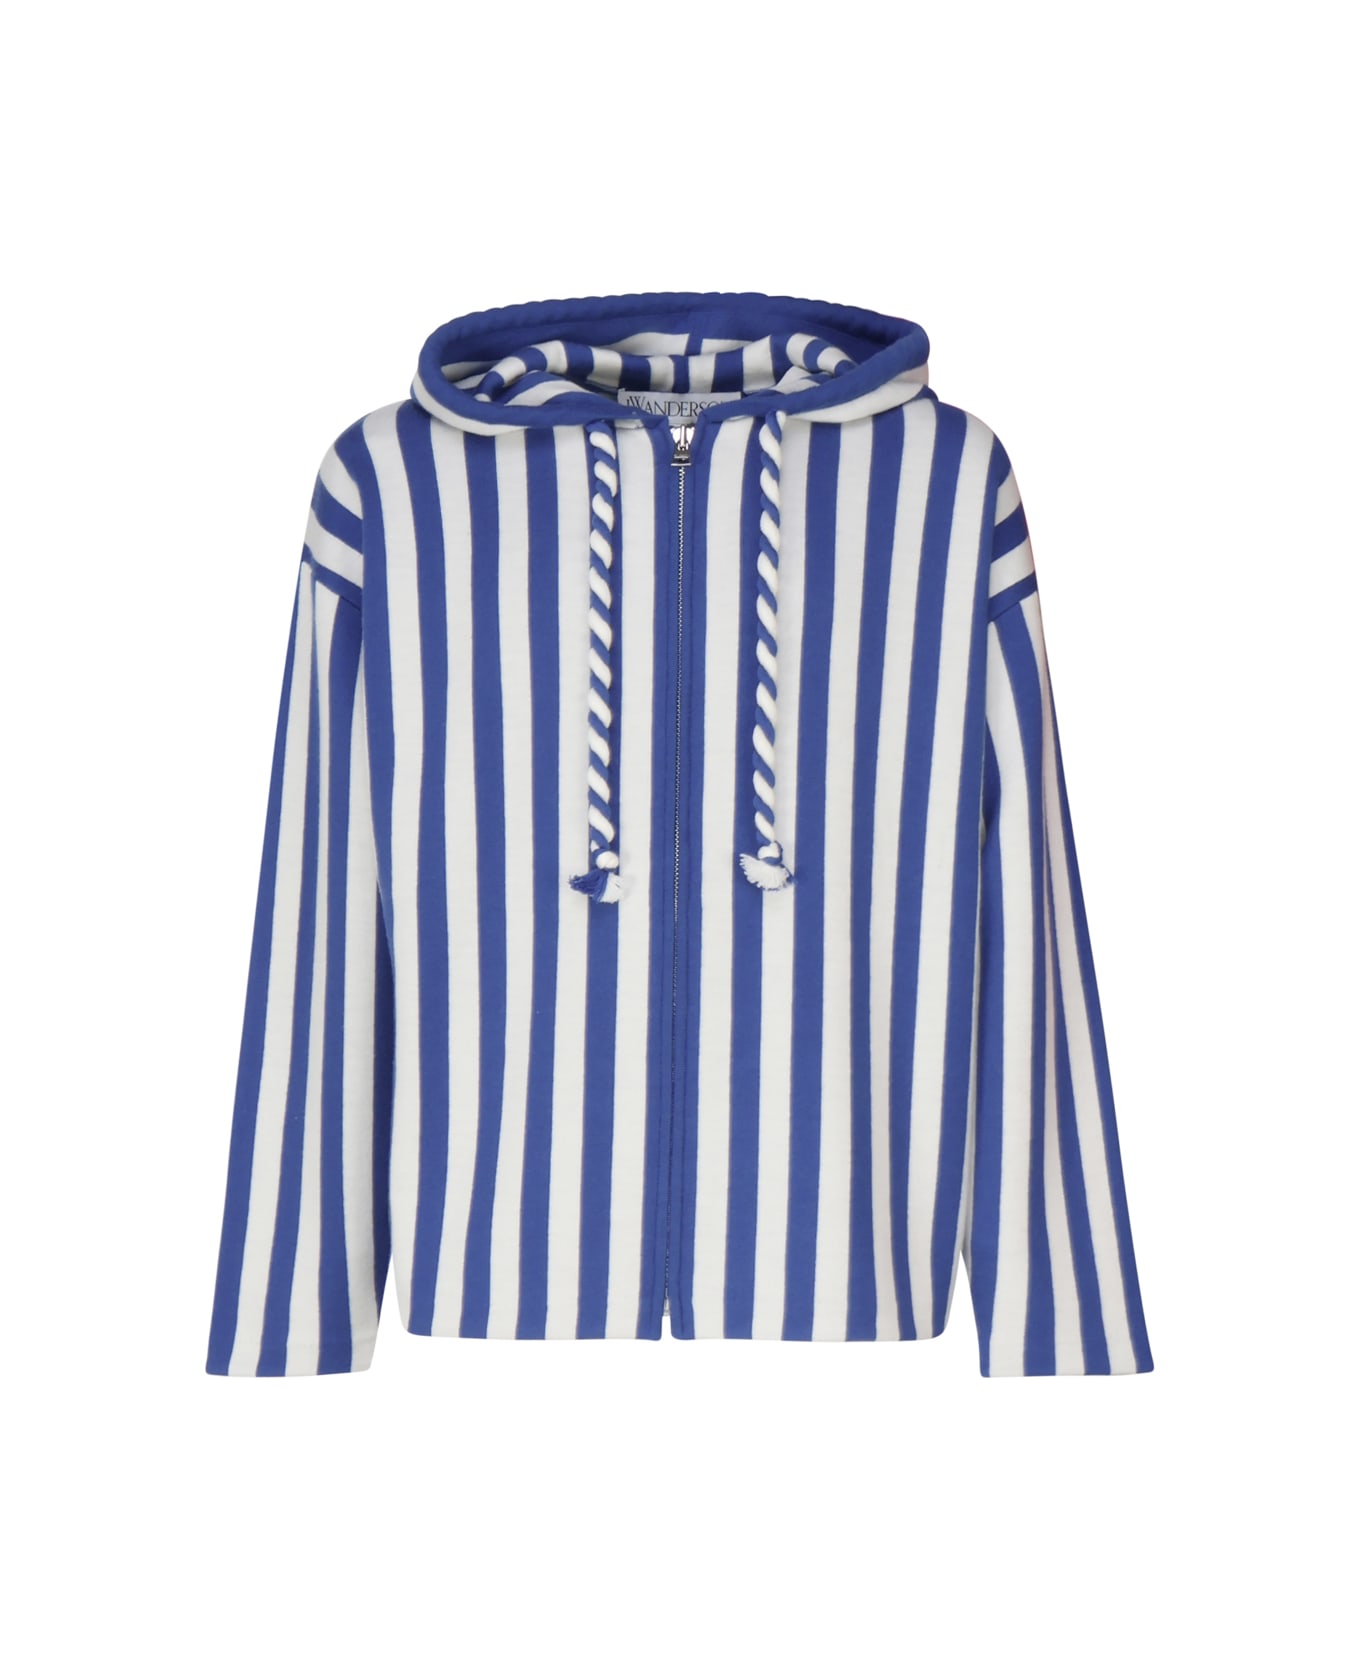 J.W. Anderson Hooded Cardigan - Blue/white